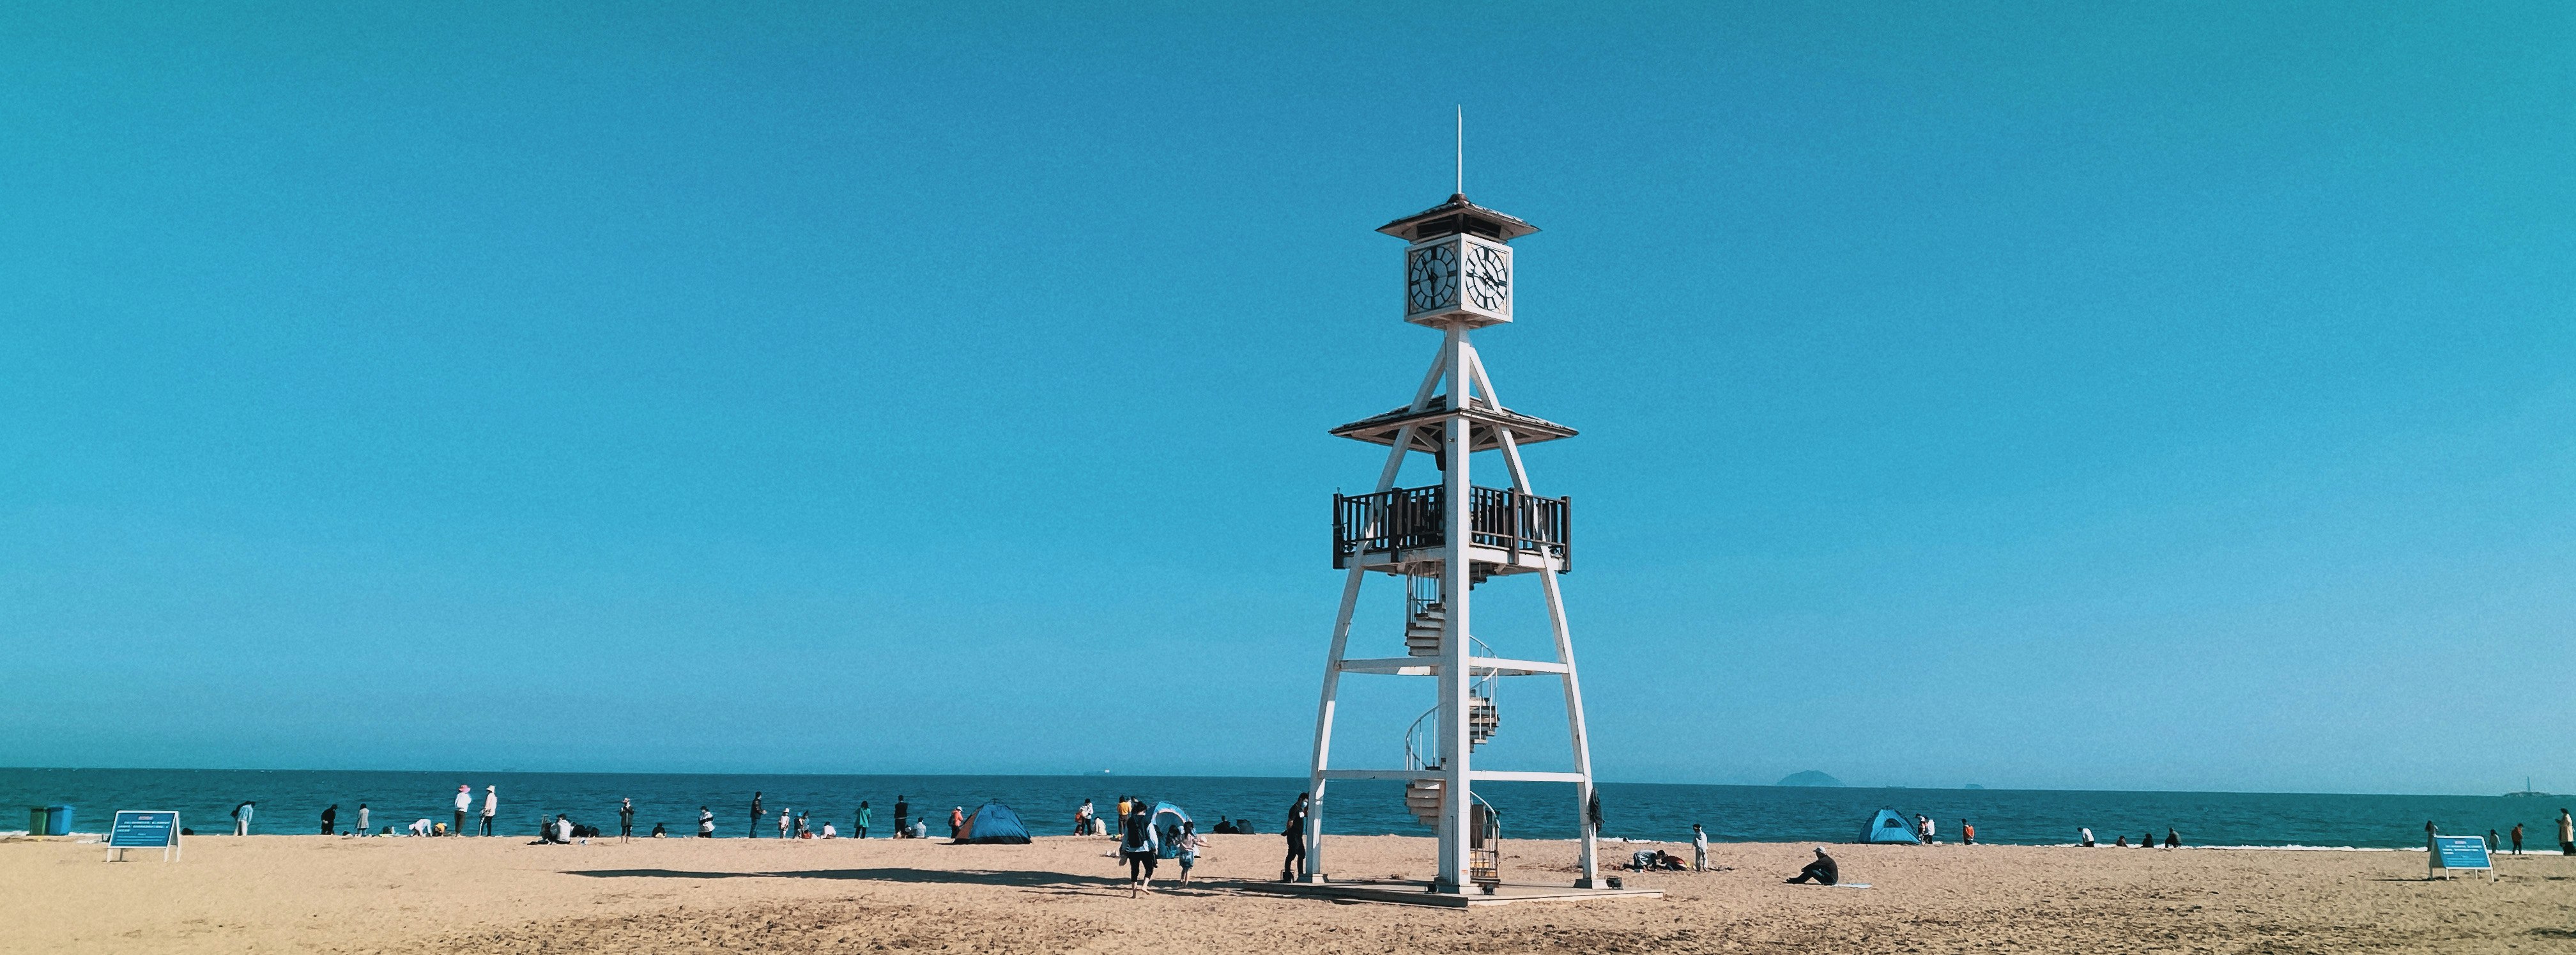 white and brown wooden lifeguard tower on beach during daytime